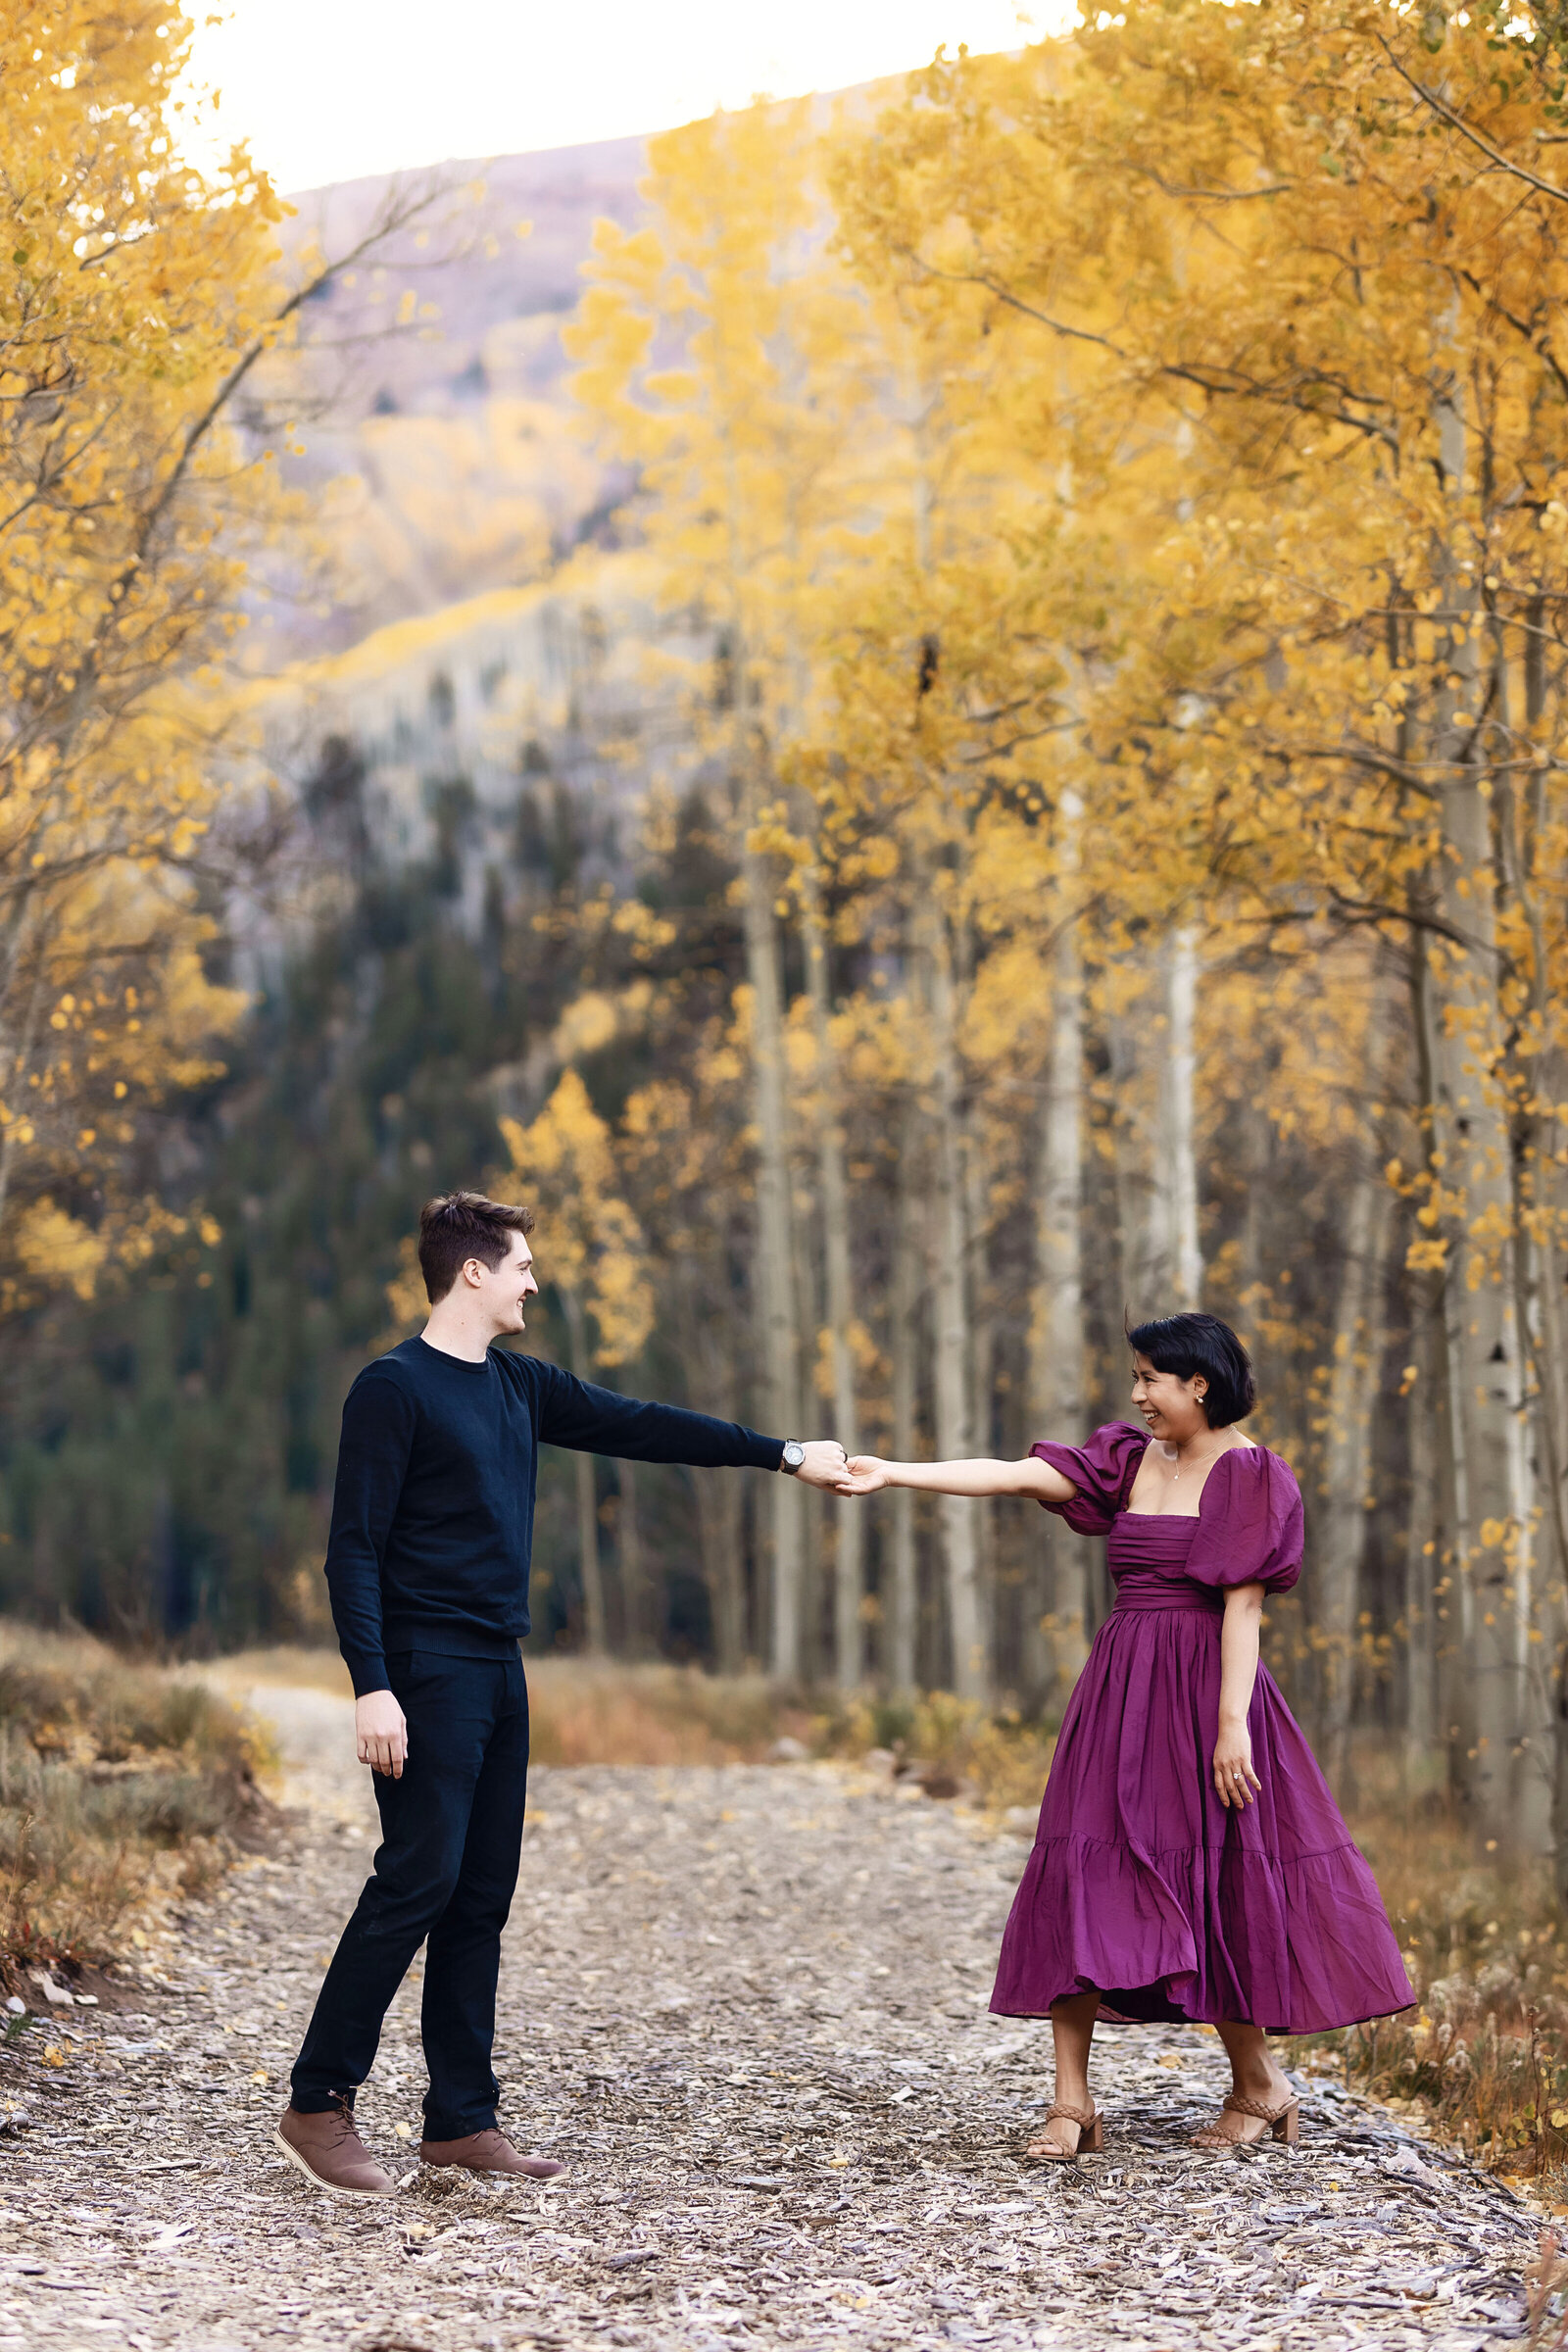 A man and woman dance in the beautiful fall  foliage in Aspen, Colorado for their engagement photoshoot.